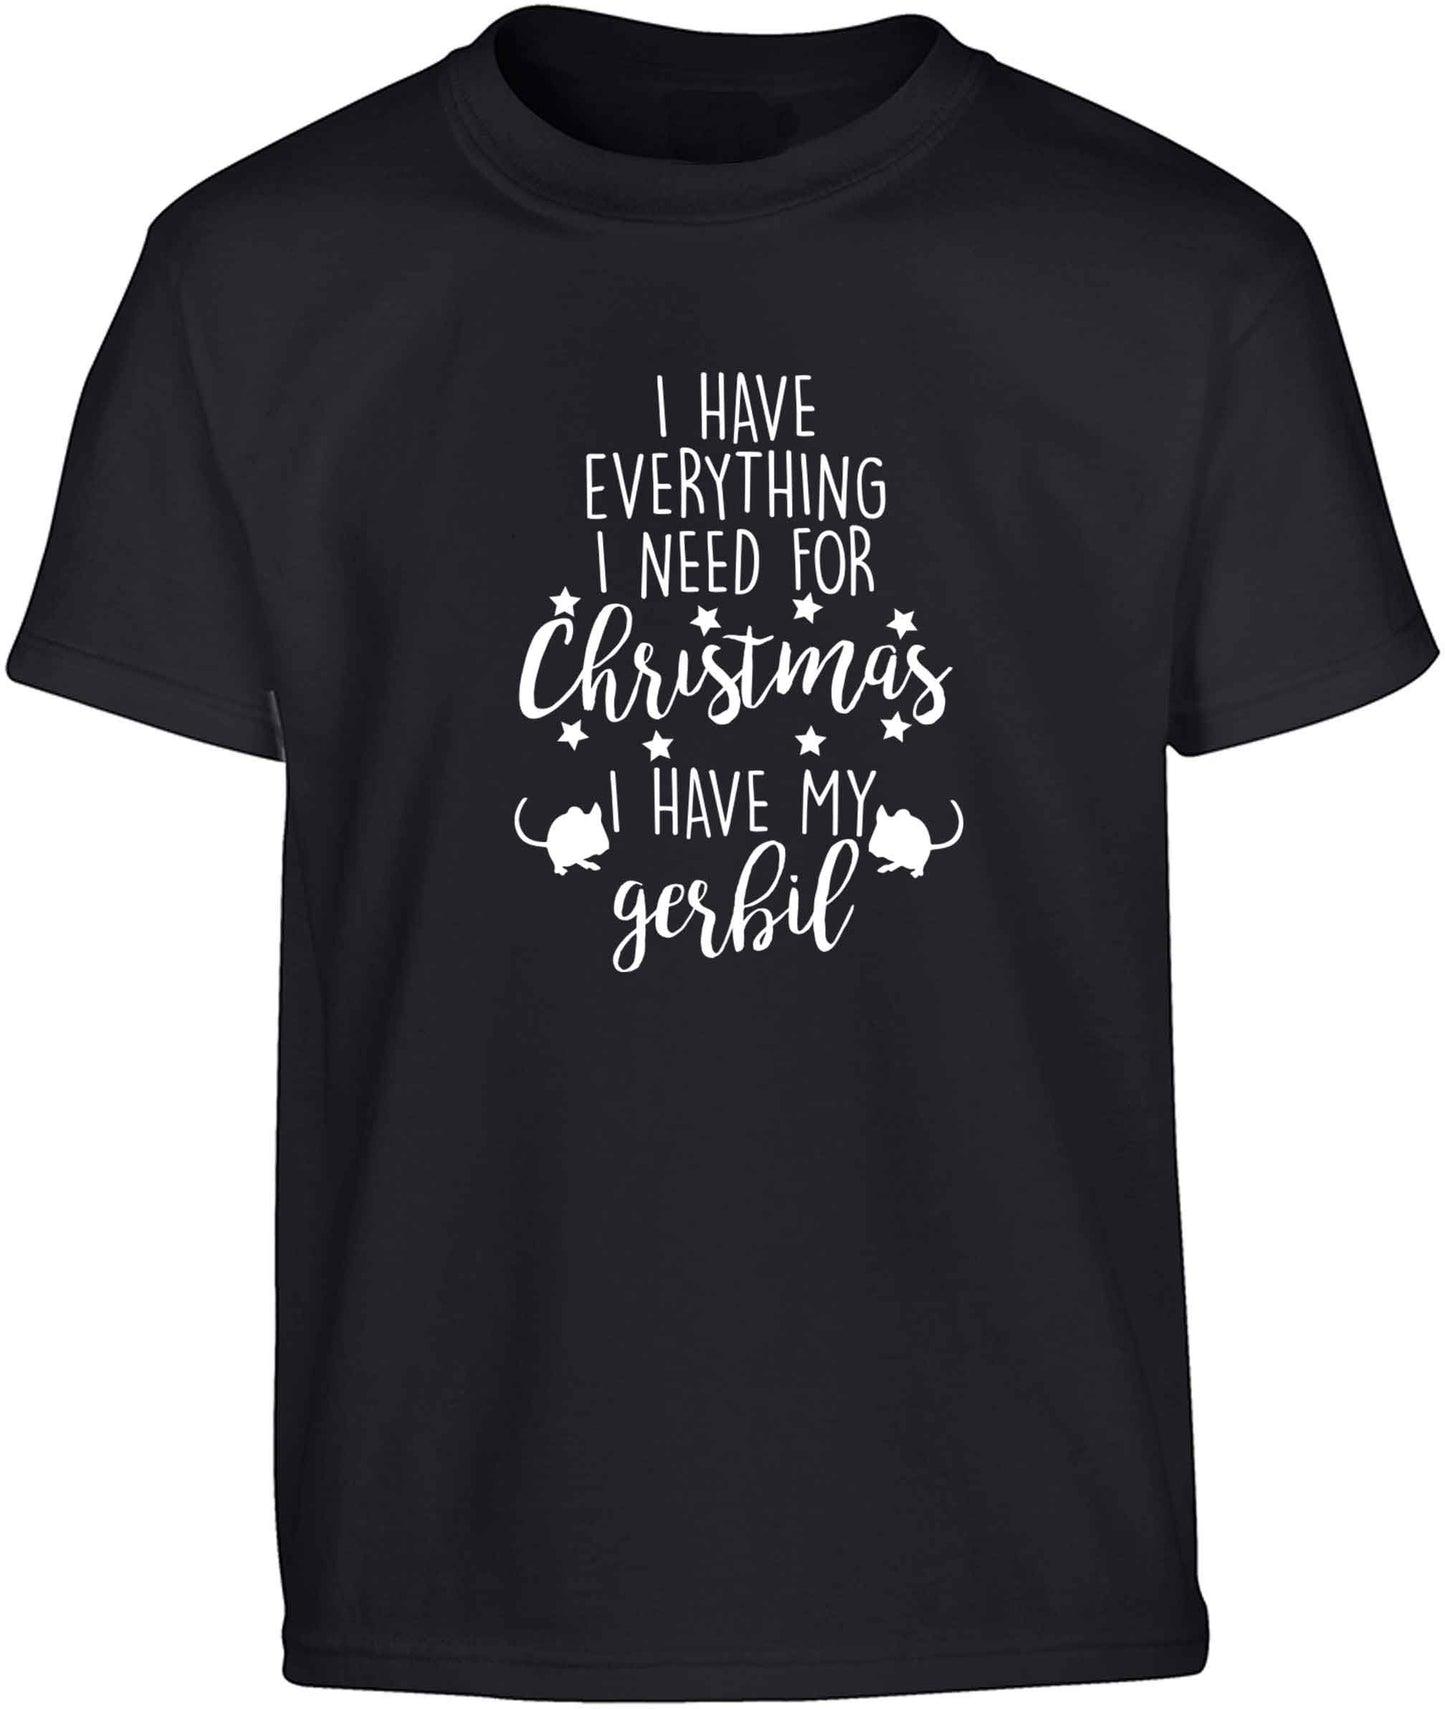 I have everything I need for Christmas I have my gerbil Children's black Tshirt 12-13 Years